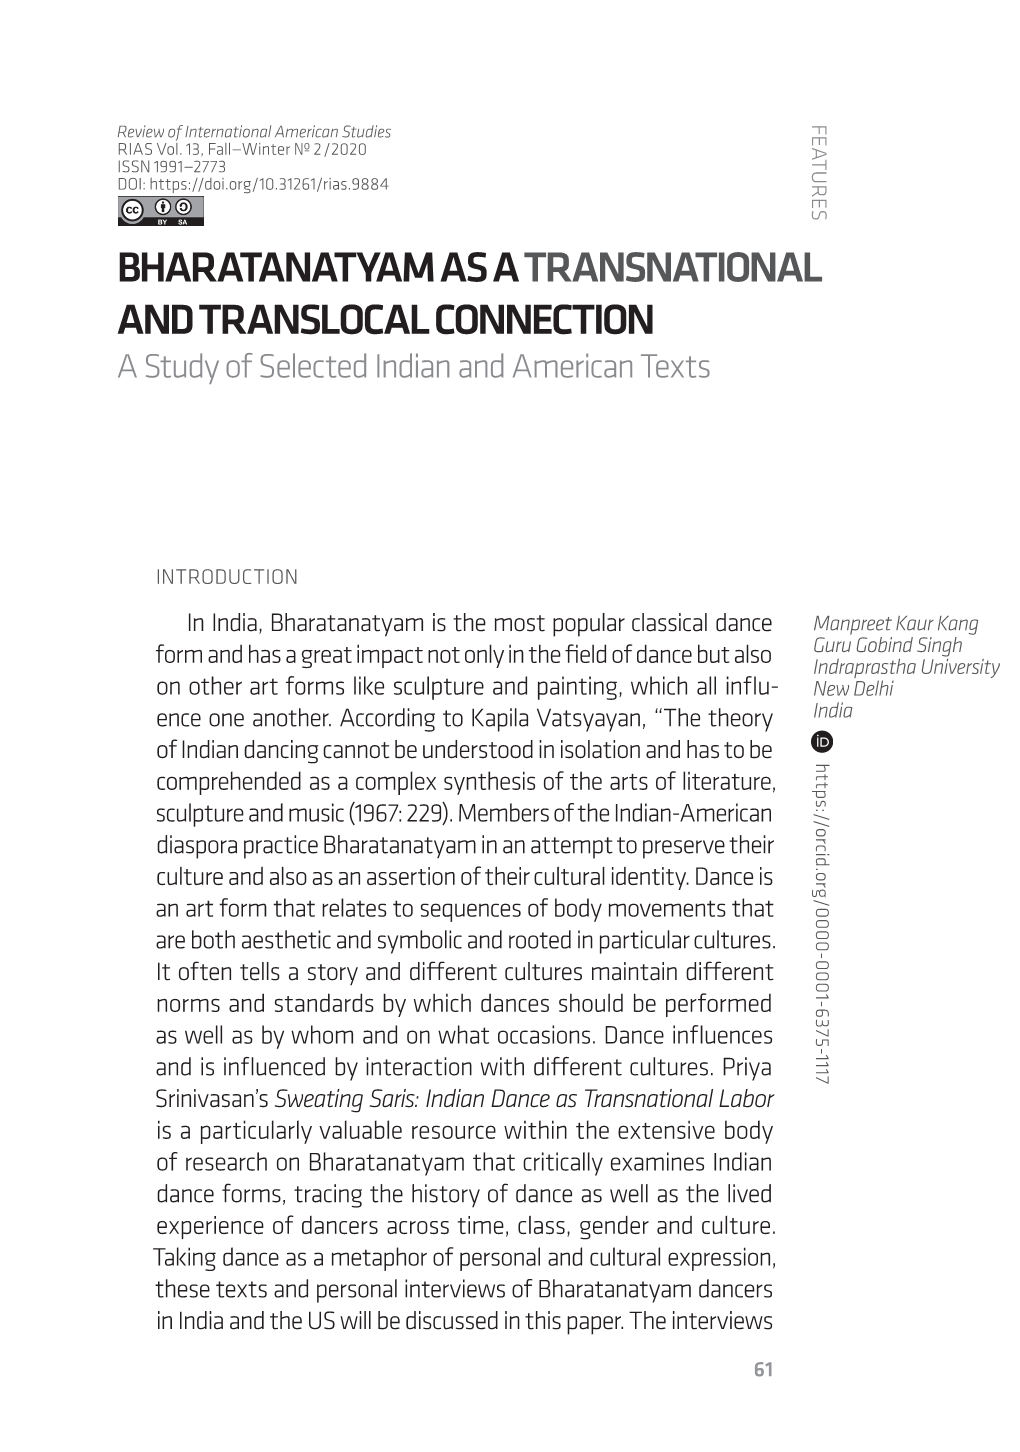 BHARATANATYAM AS a TRANSNATIONAL and TRANSLOCAL CONNECTION a Study of Selected Indian and American Texts